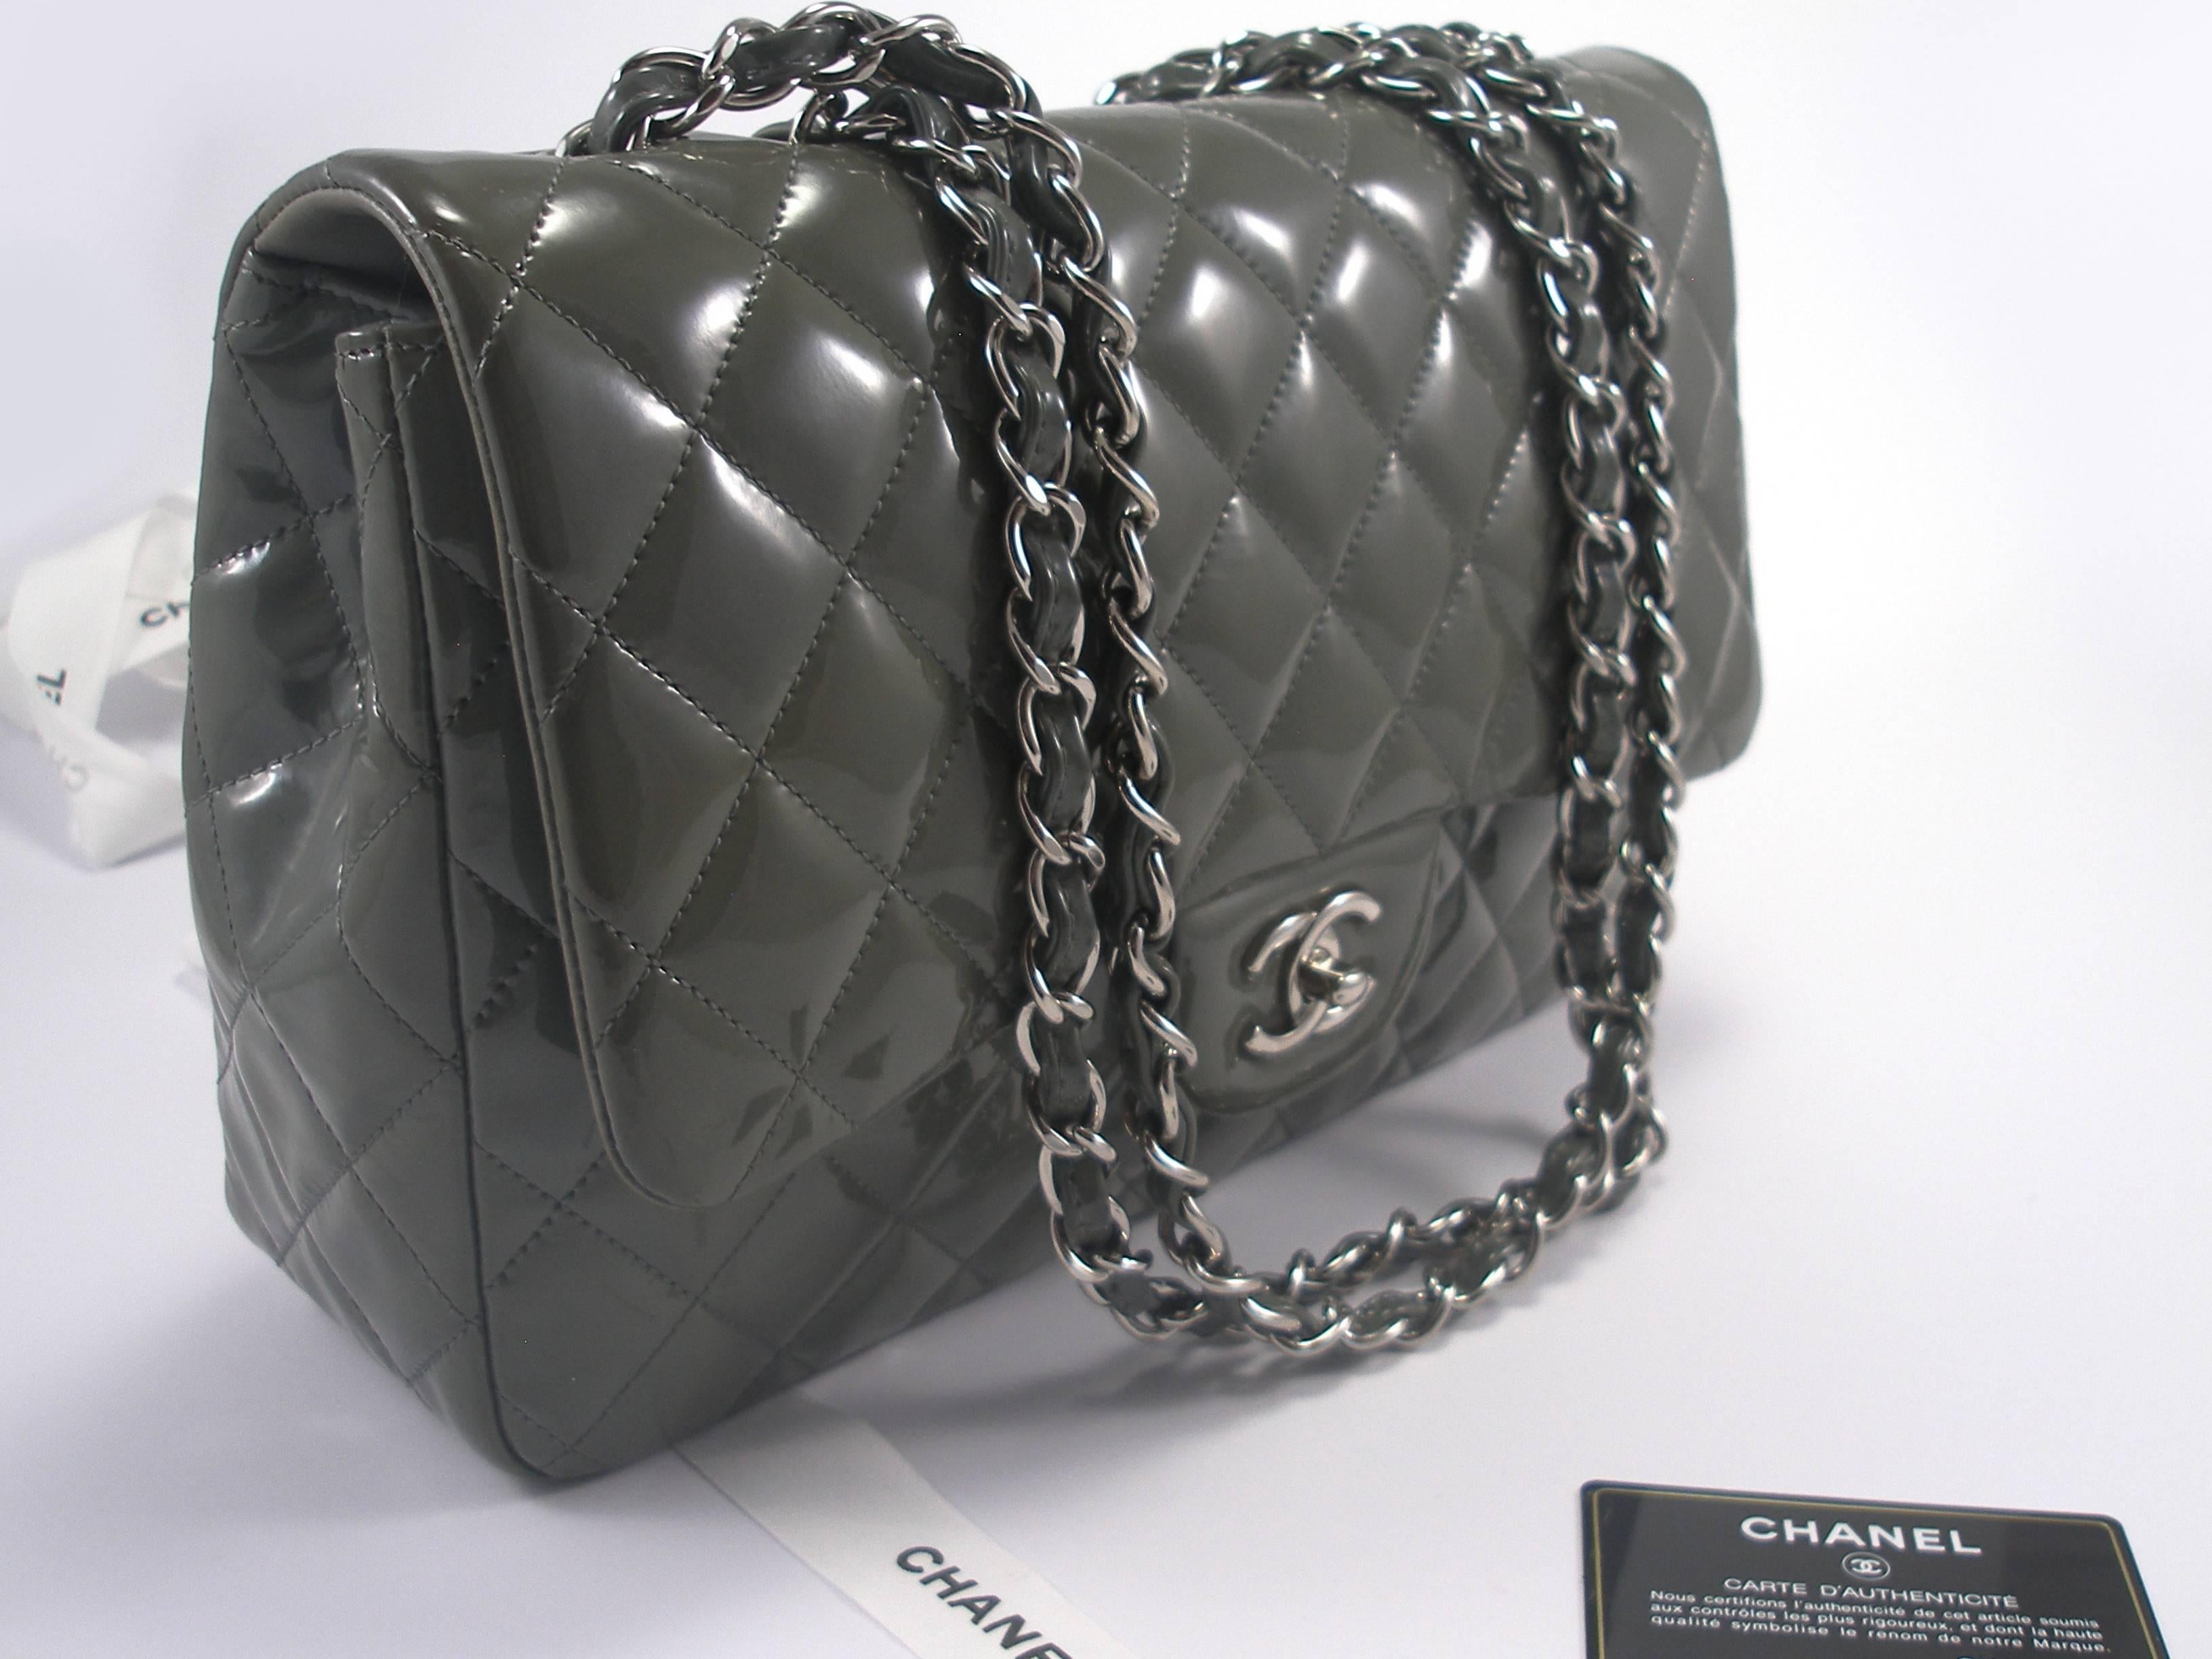 Chanel Classic Jumbo 
Patent leather 
Color : grey
Palladium hardware 
Code date inside 13....
Dimension : L 30 x 19.5 x 10 cm
Considere for this purchase : 
Bag in good condition, note a slight discoloration
on the back is barely visible , small